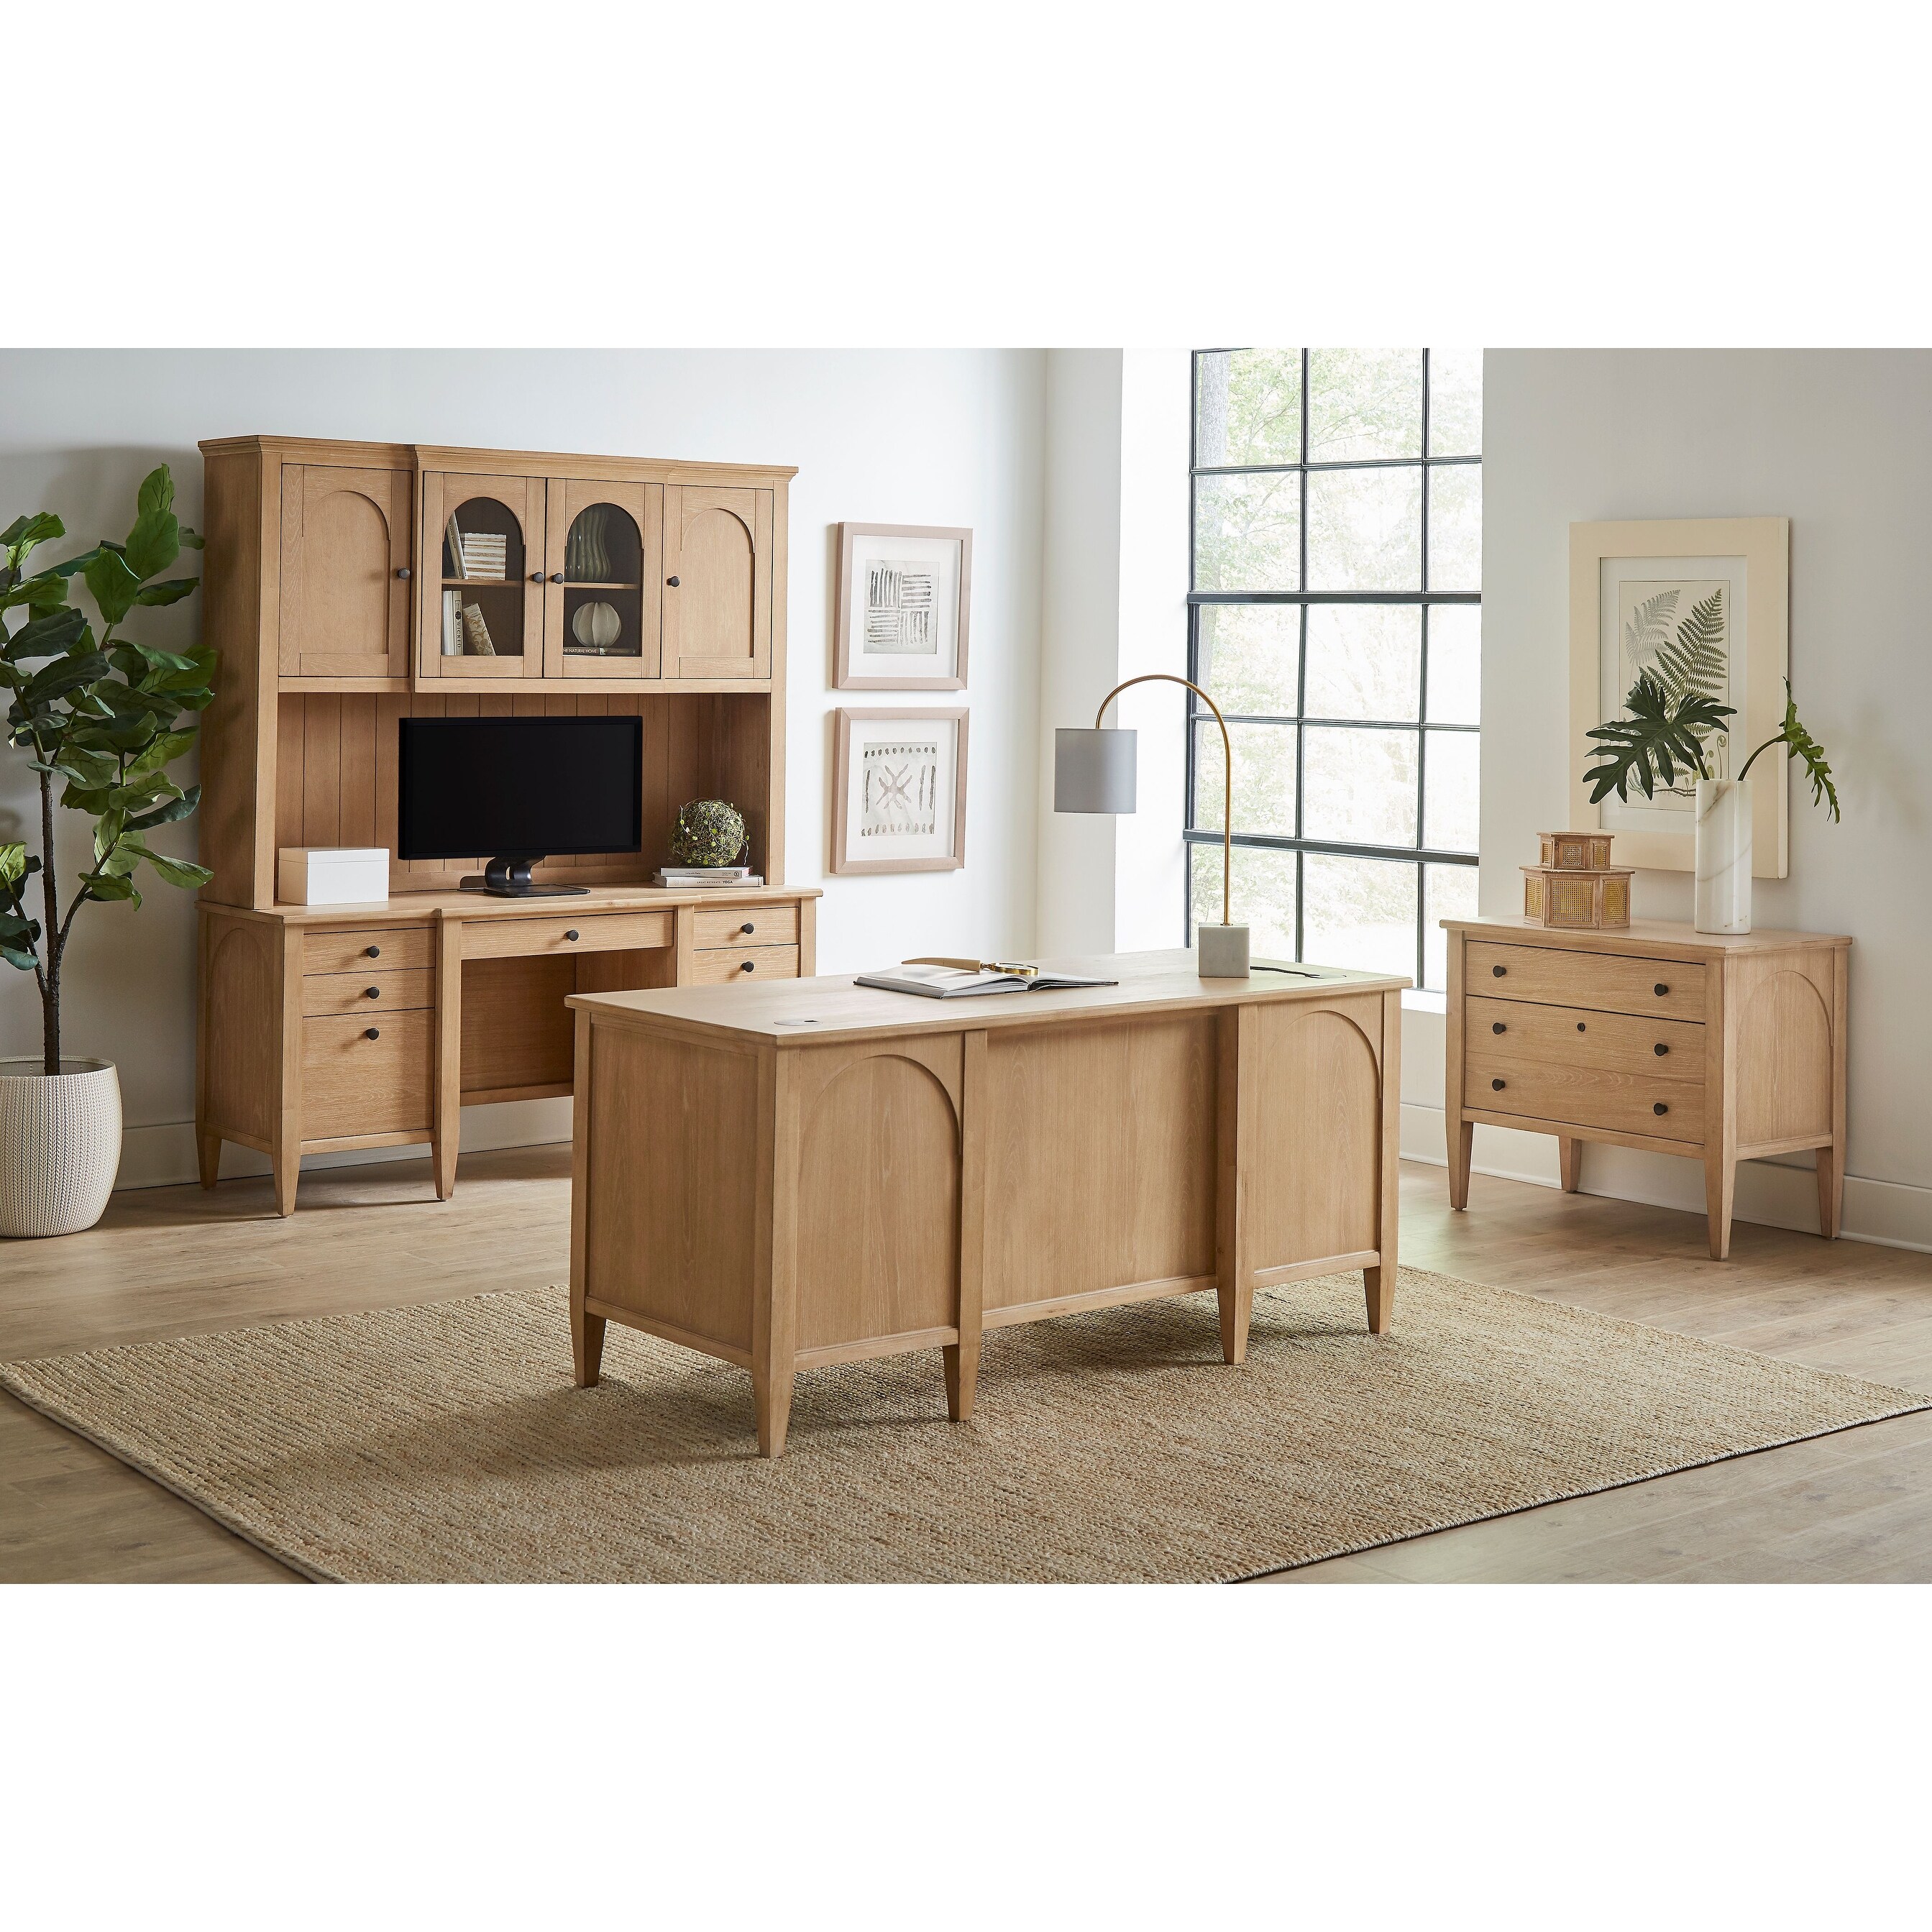 Modern Wood Hutch With Doors, Storage Hutch, Office Storage, Fully Assembled, Light Brown